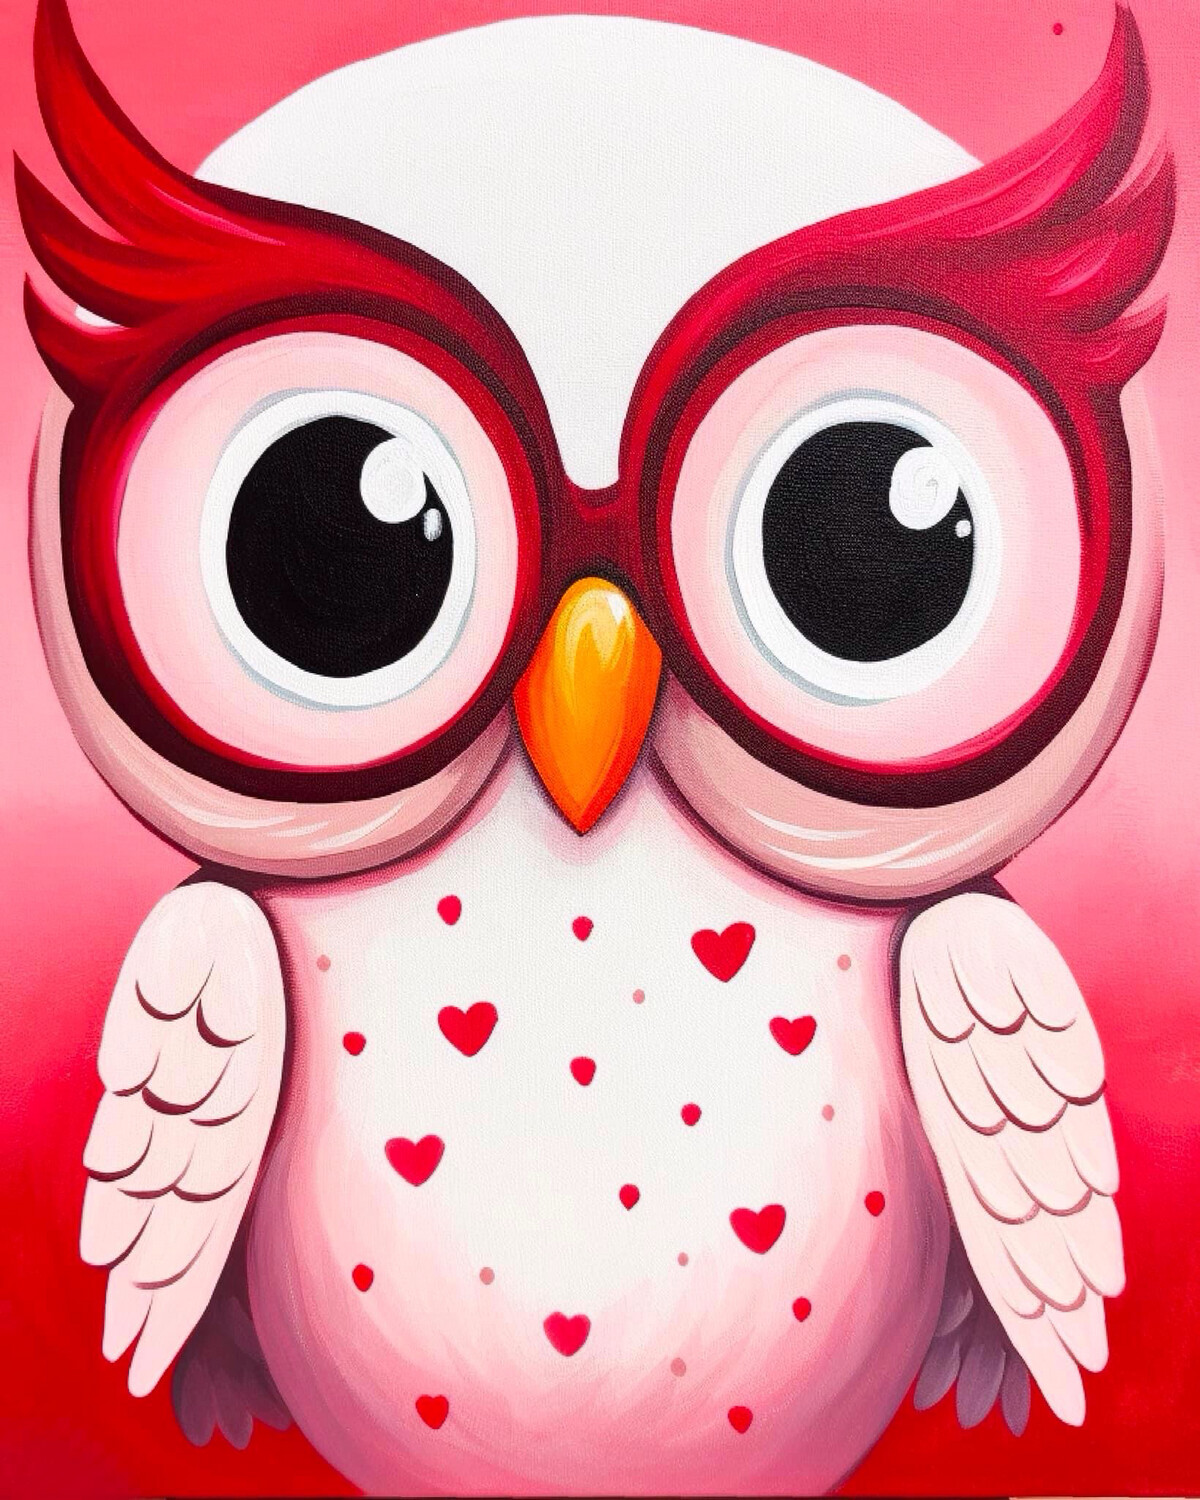 OWL LOVE YOU PAINTING KIT